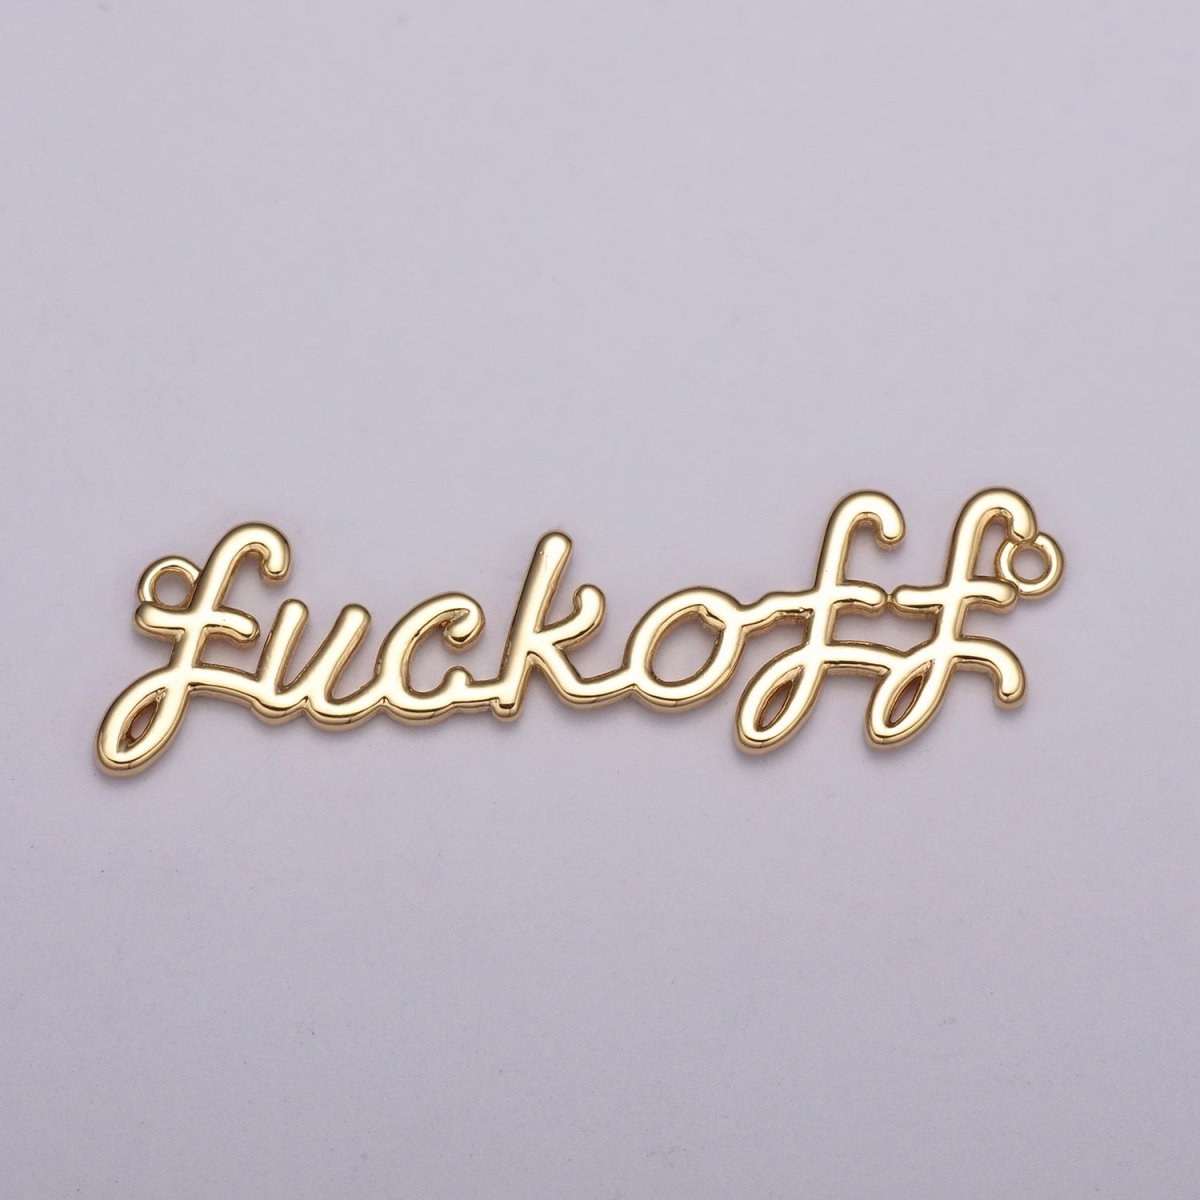 Dainty Gold Filled Fuck Off Charm for Necklace Bracelet, Fuckoff Link Connector, Fuck Off Word Cursive Jewelry Silver Personalized Script Necklace, Swear Word Pendant Trend Jewelry N-088 N-089 - DLUXCA